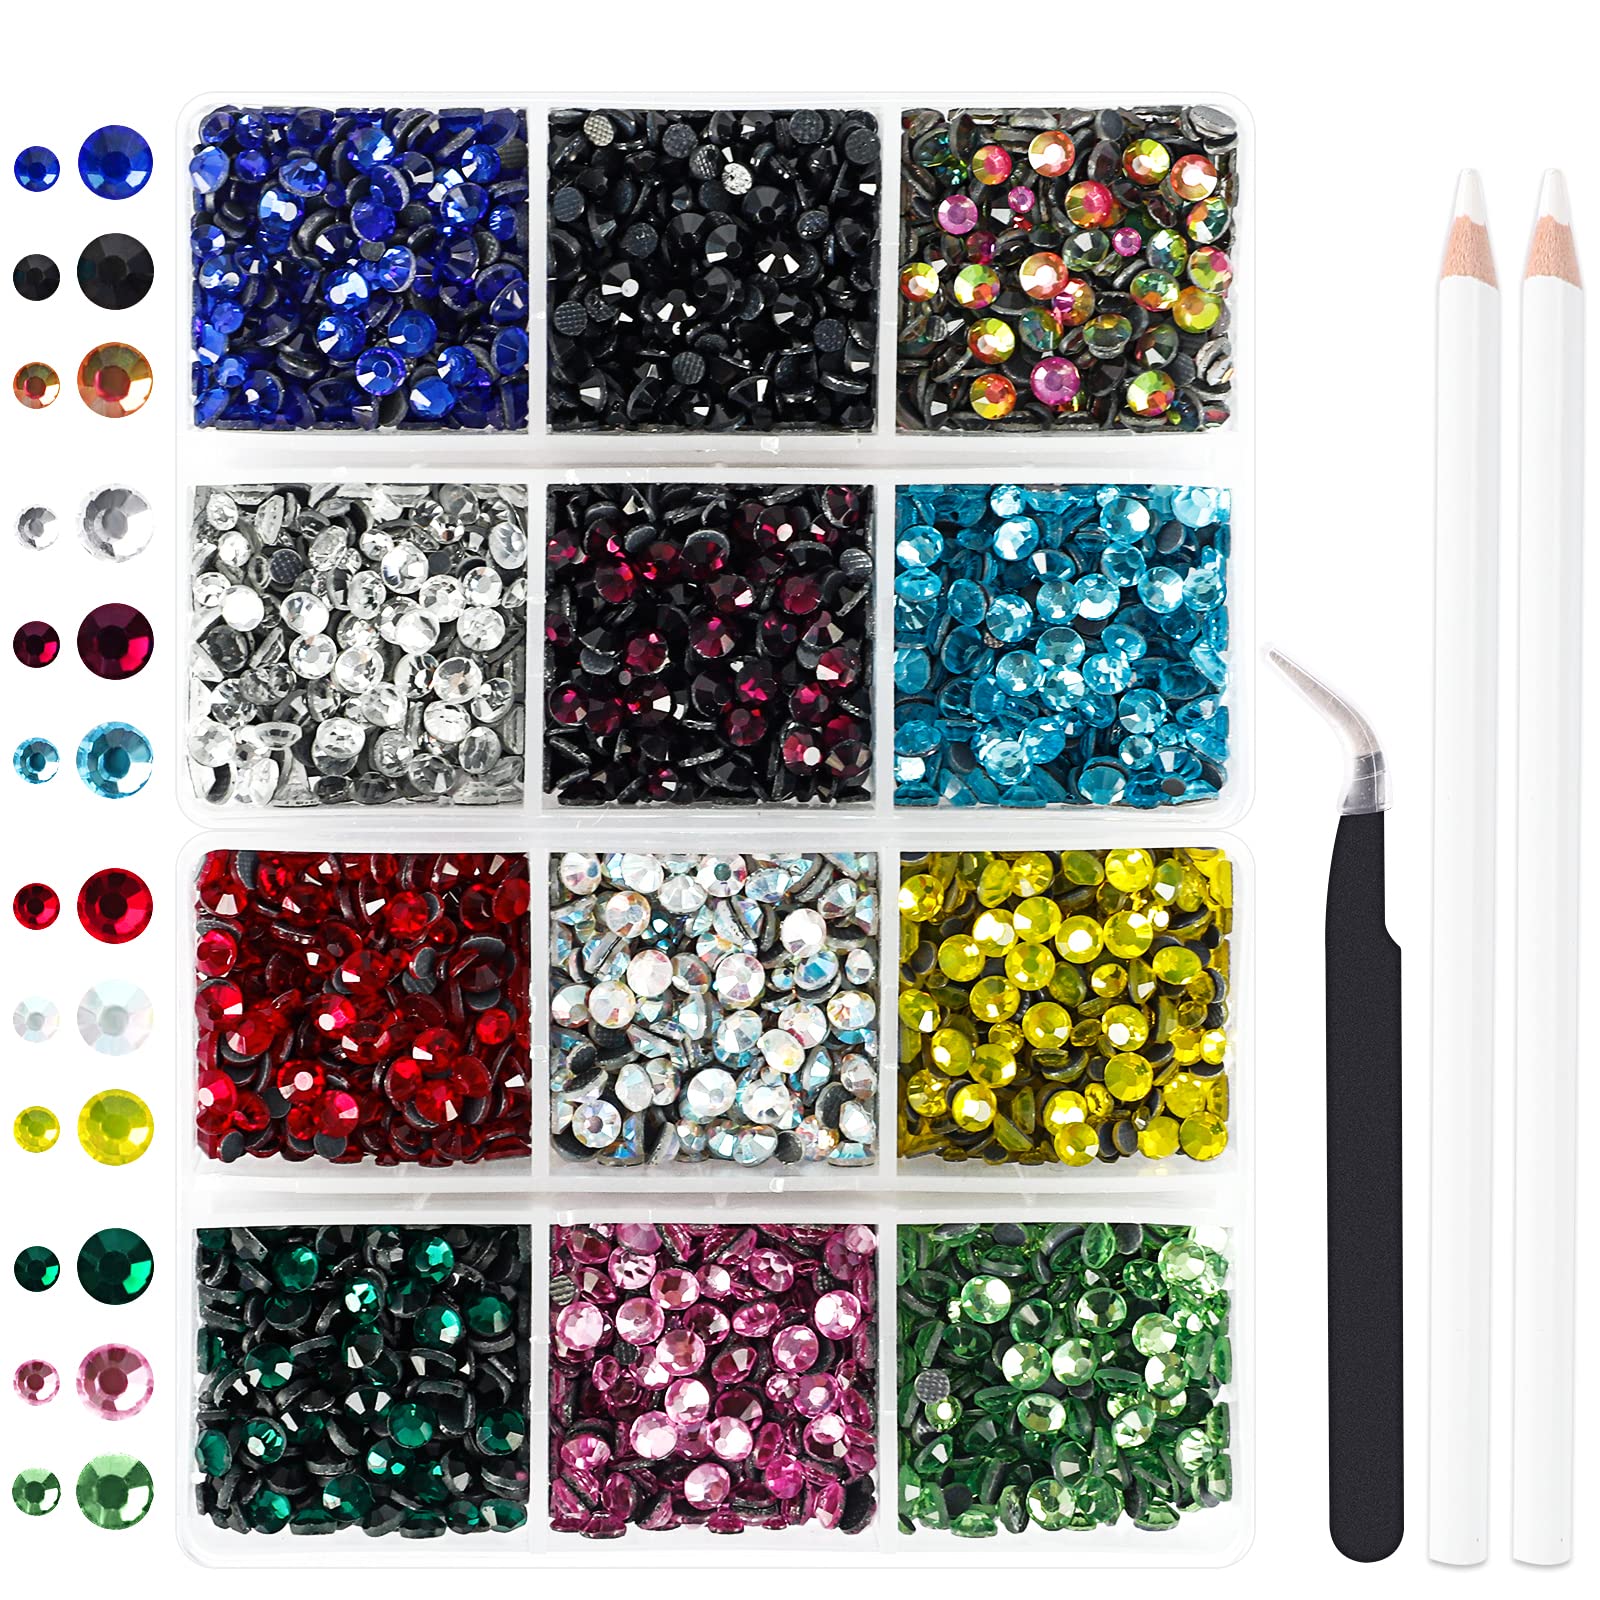 OUTUXED 5400pcs Multicolor Rhinestones 12 Mixed Color Hotfix Rhinestones  Flatback Gemstones and Crystals for Crafts Clothes with Tweezers and 2  Picking Pens